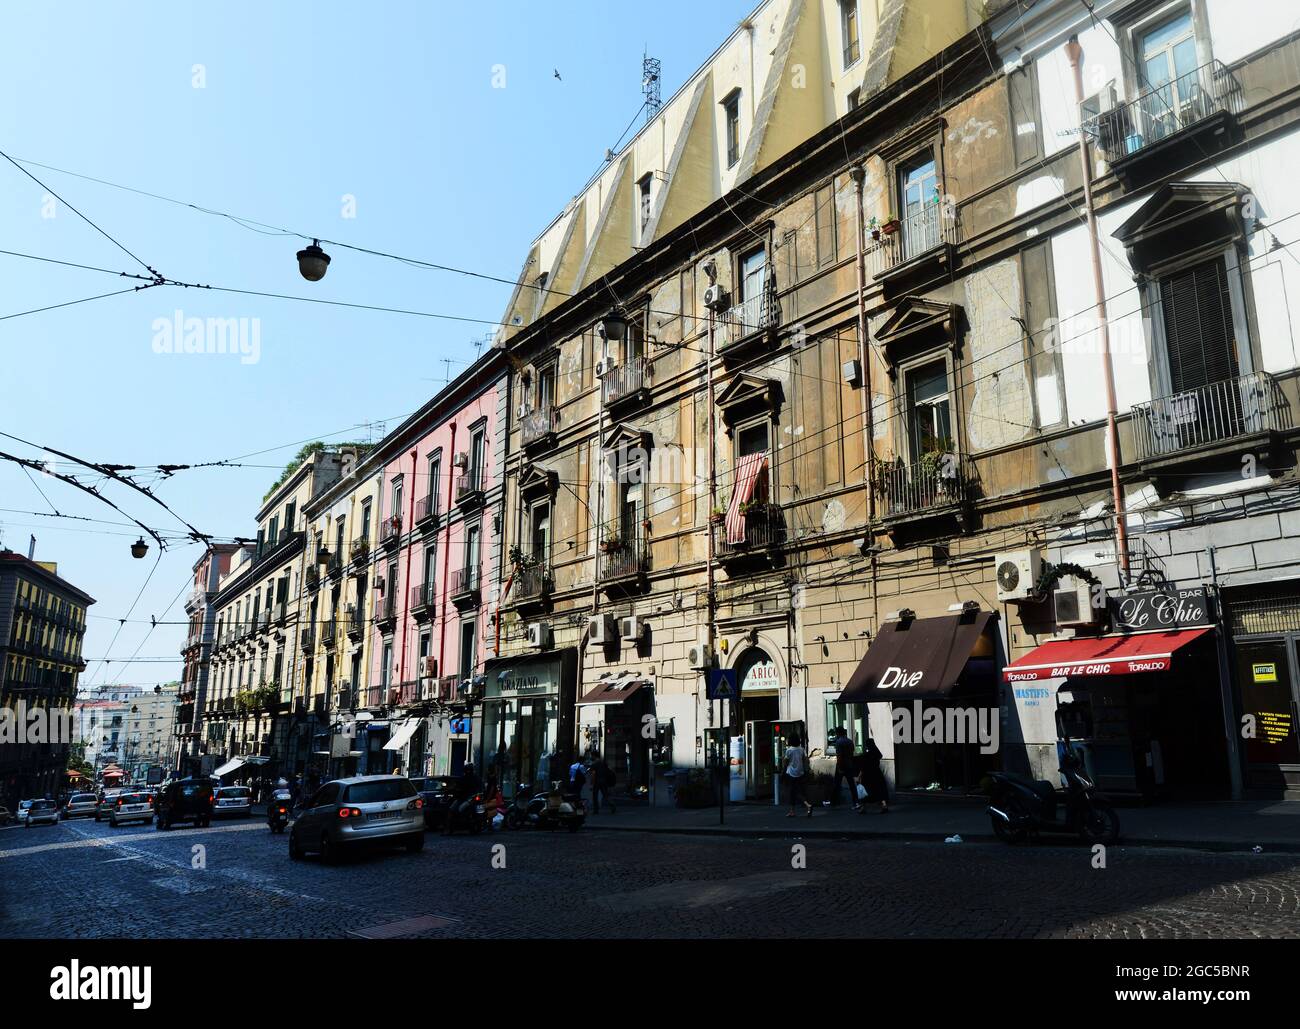 Shops and cafes on Via Enrico Pessina in Naples, Italy. Stock Photo